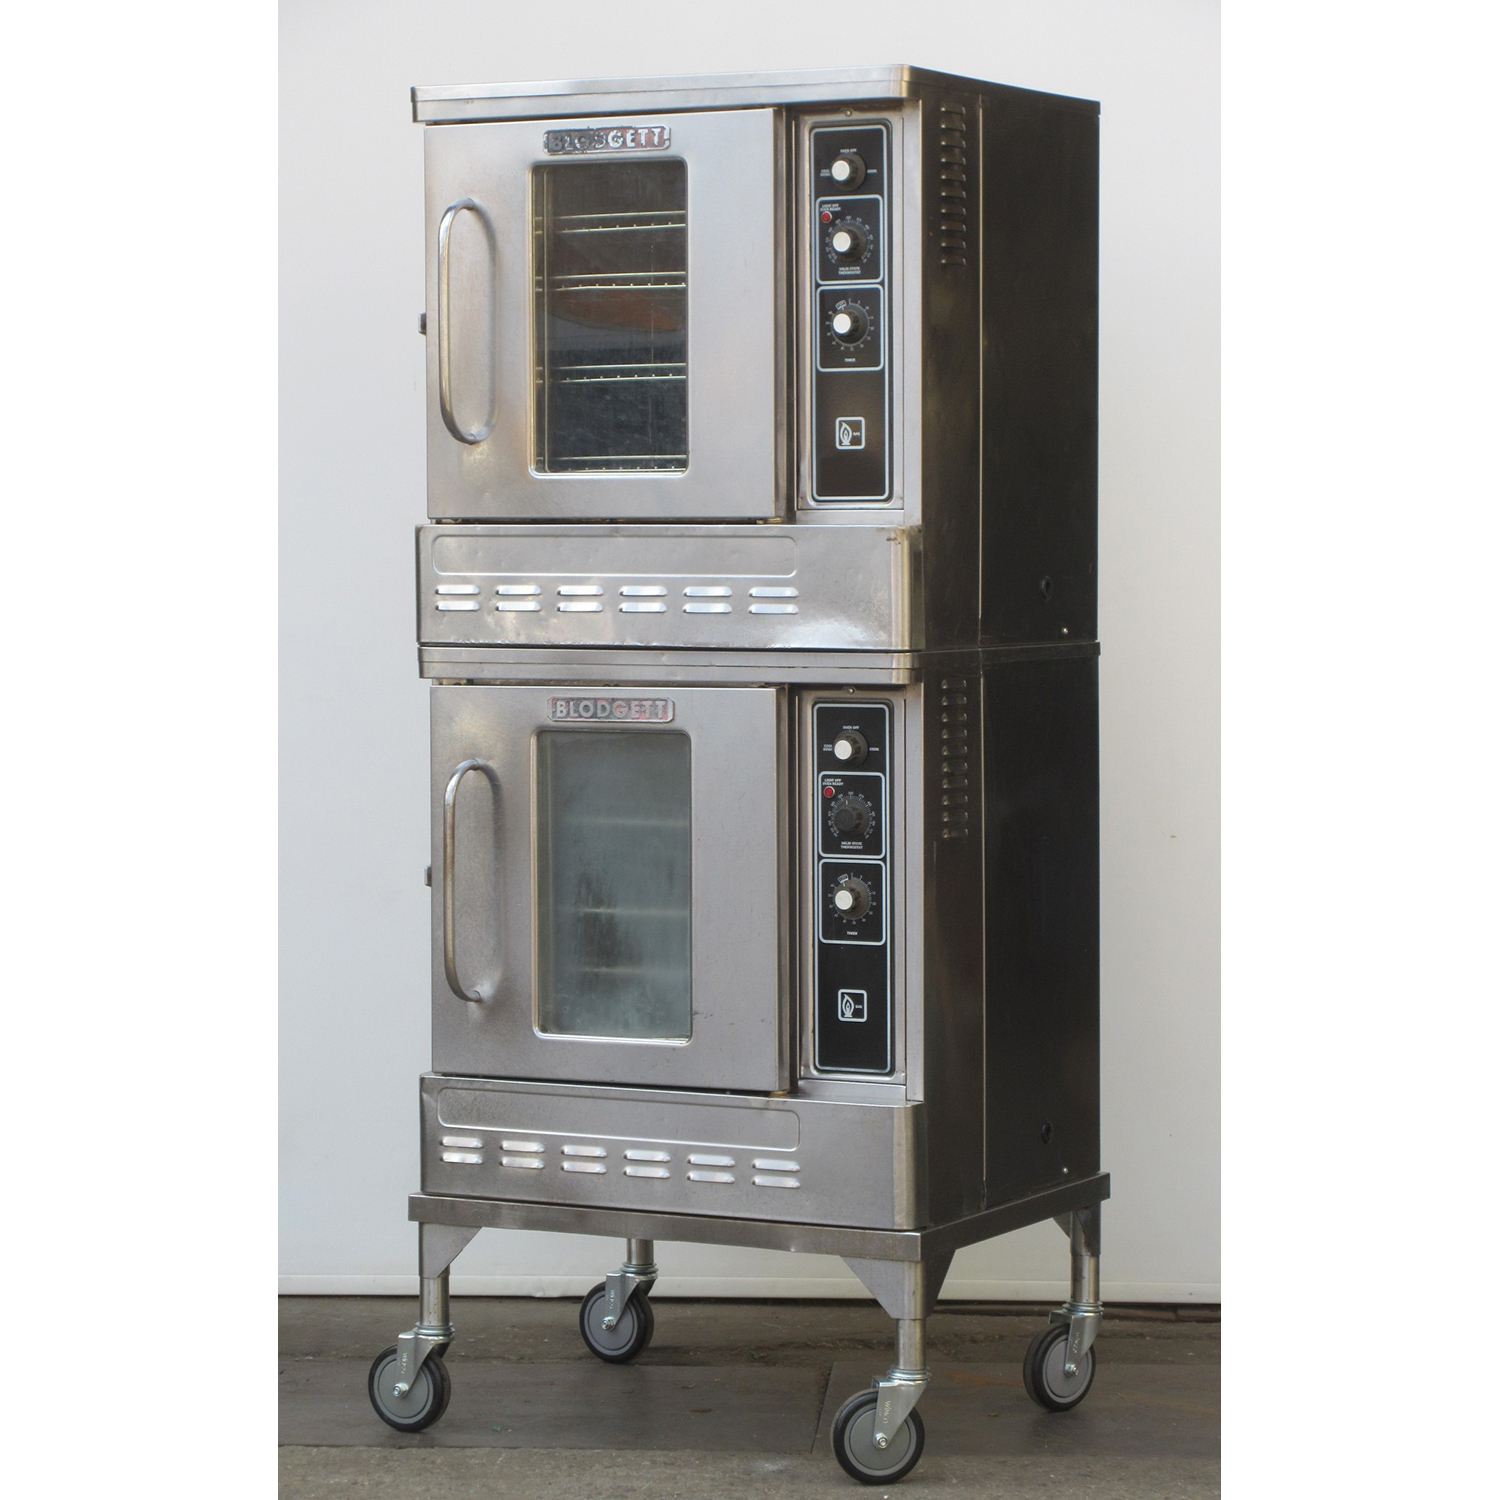 Blodgett DFG-50 Double Half Size Convection Oven, Used Excellent Condition